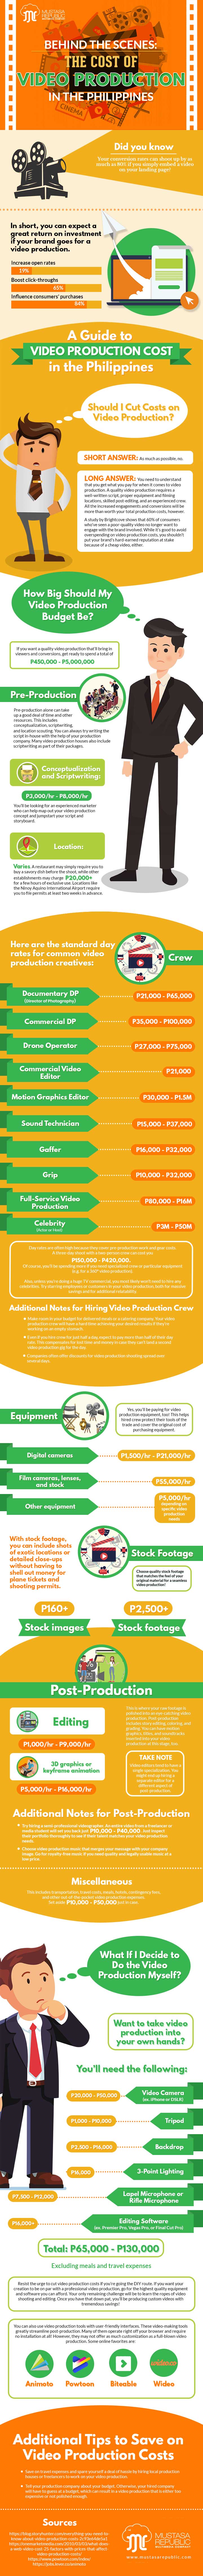 Behind The Scenes: The Cost of Video Production in the Philippines